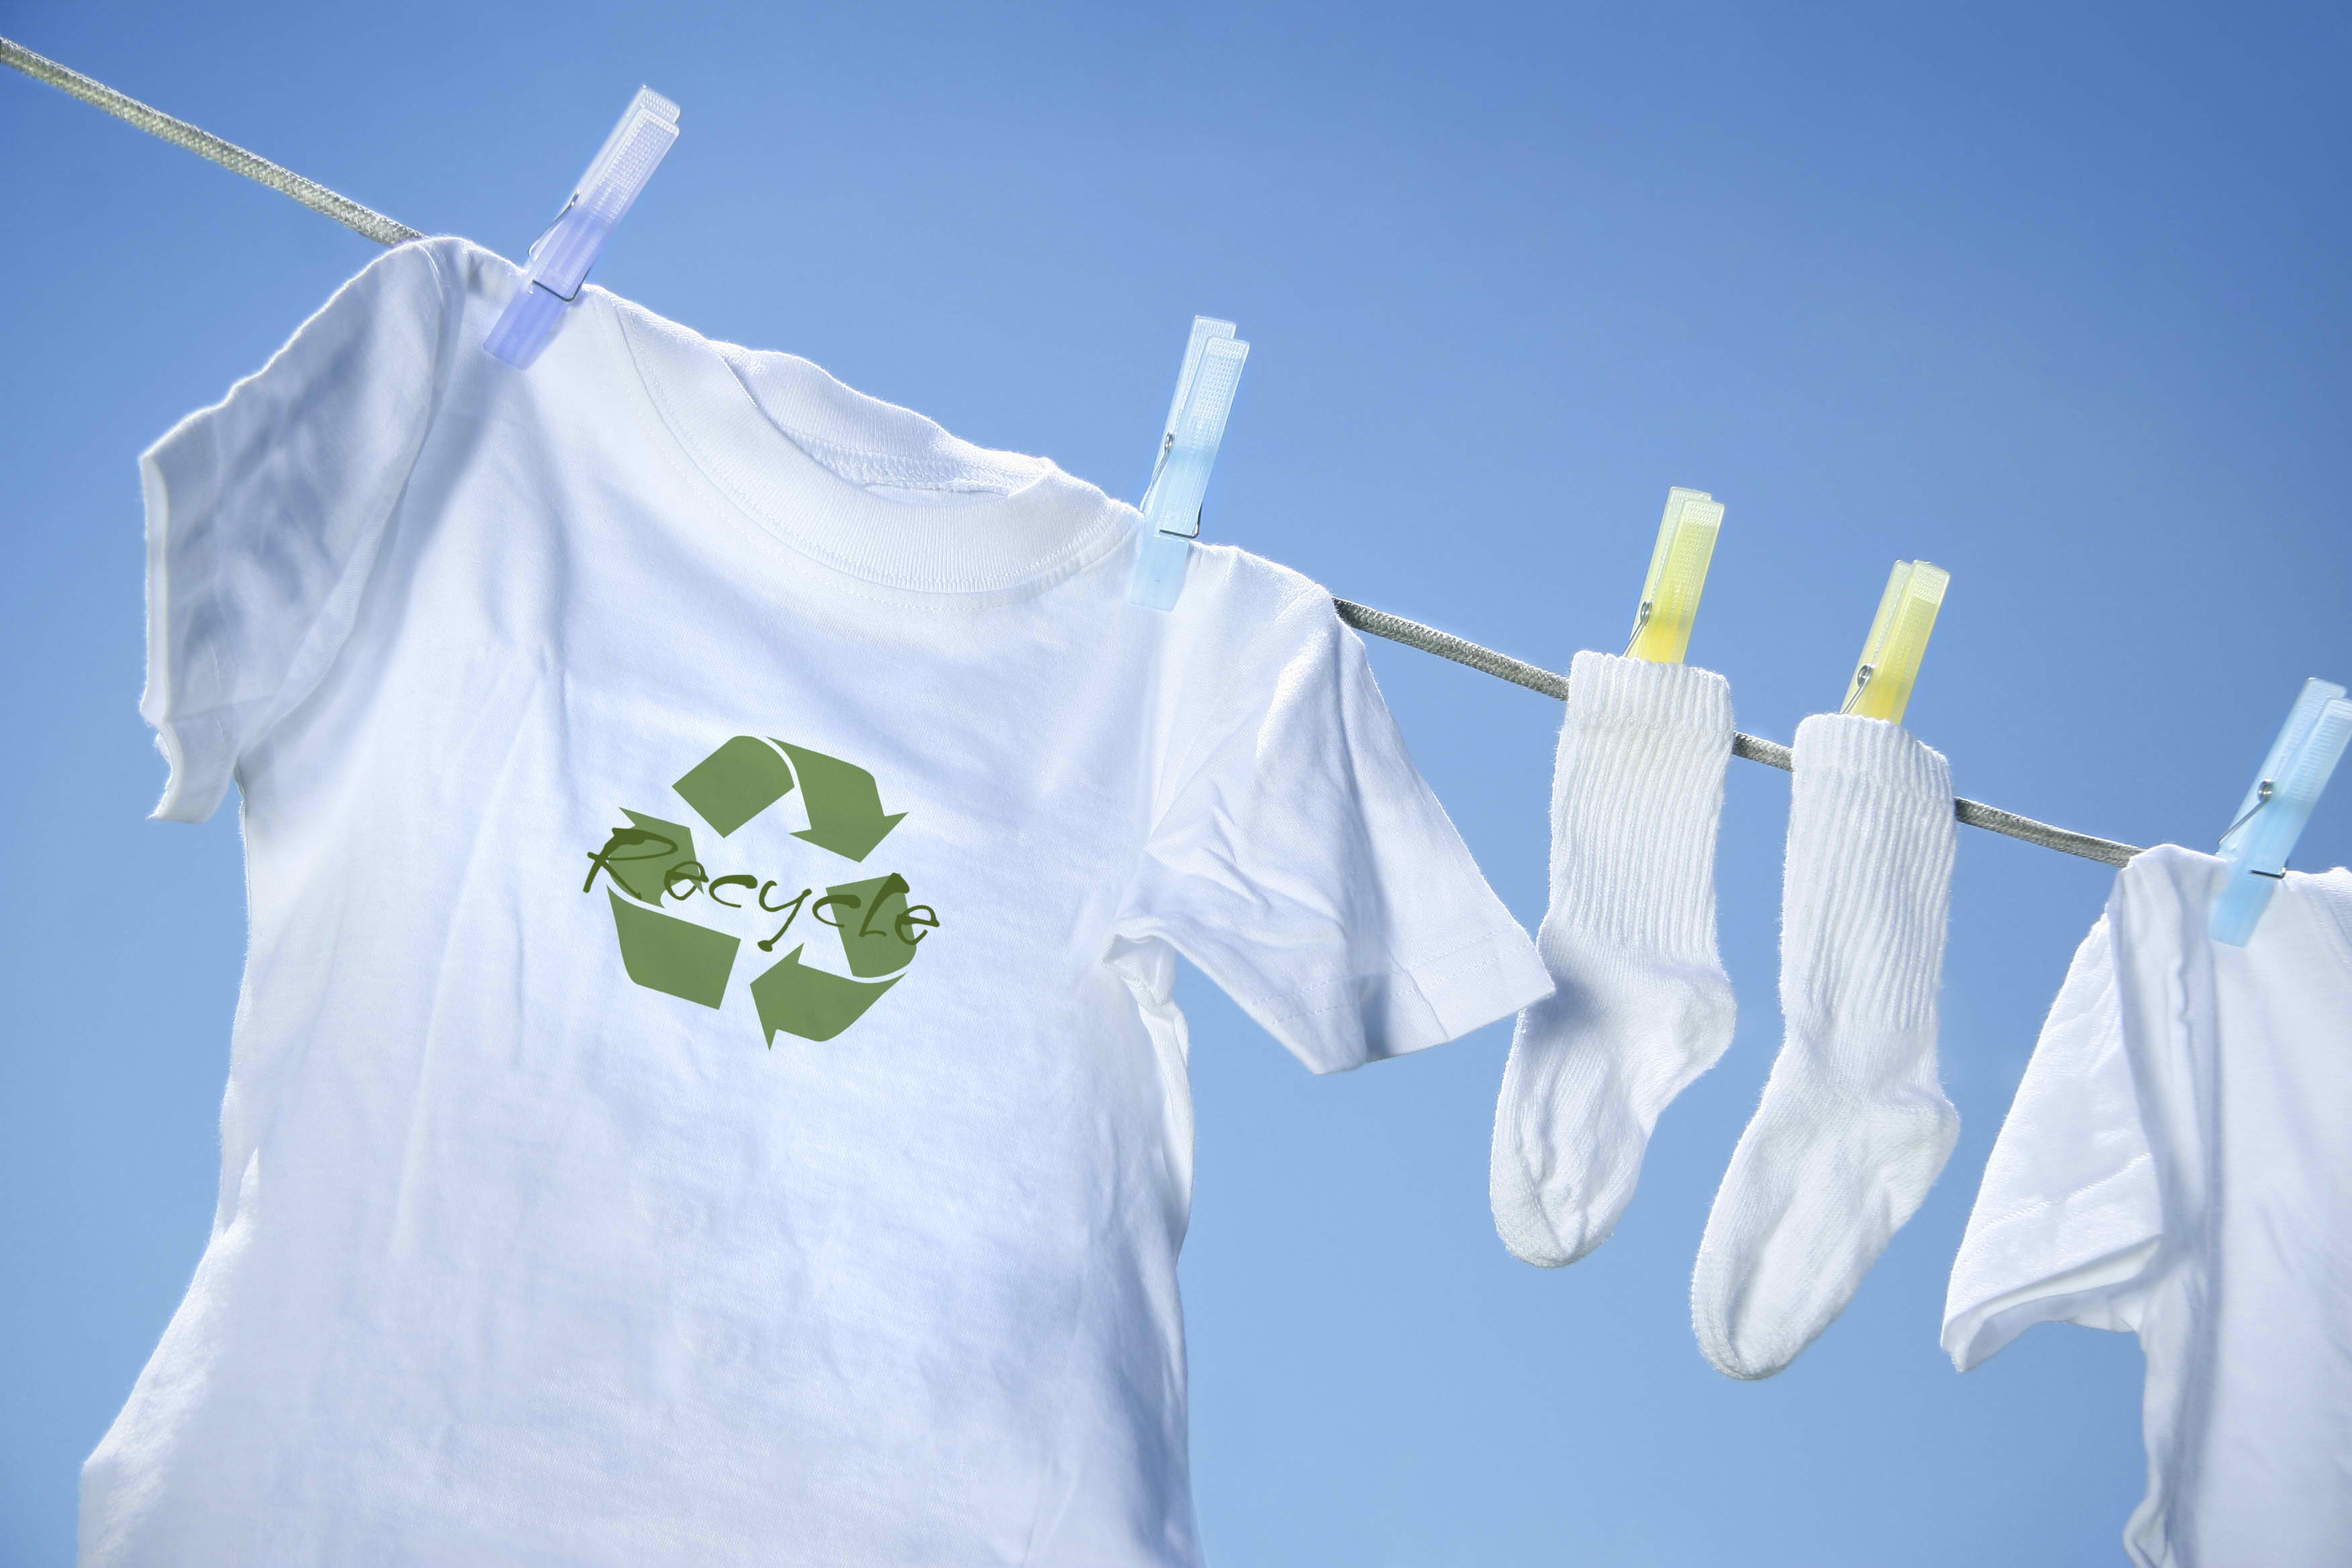 Overcoming challenges faced by sustainable clothing